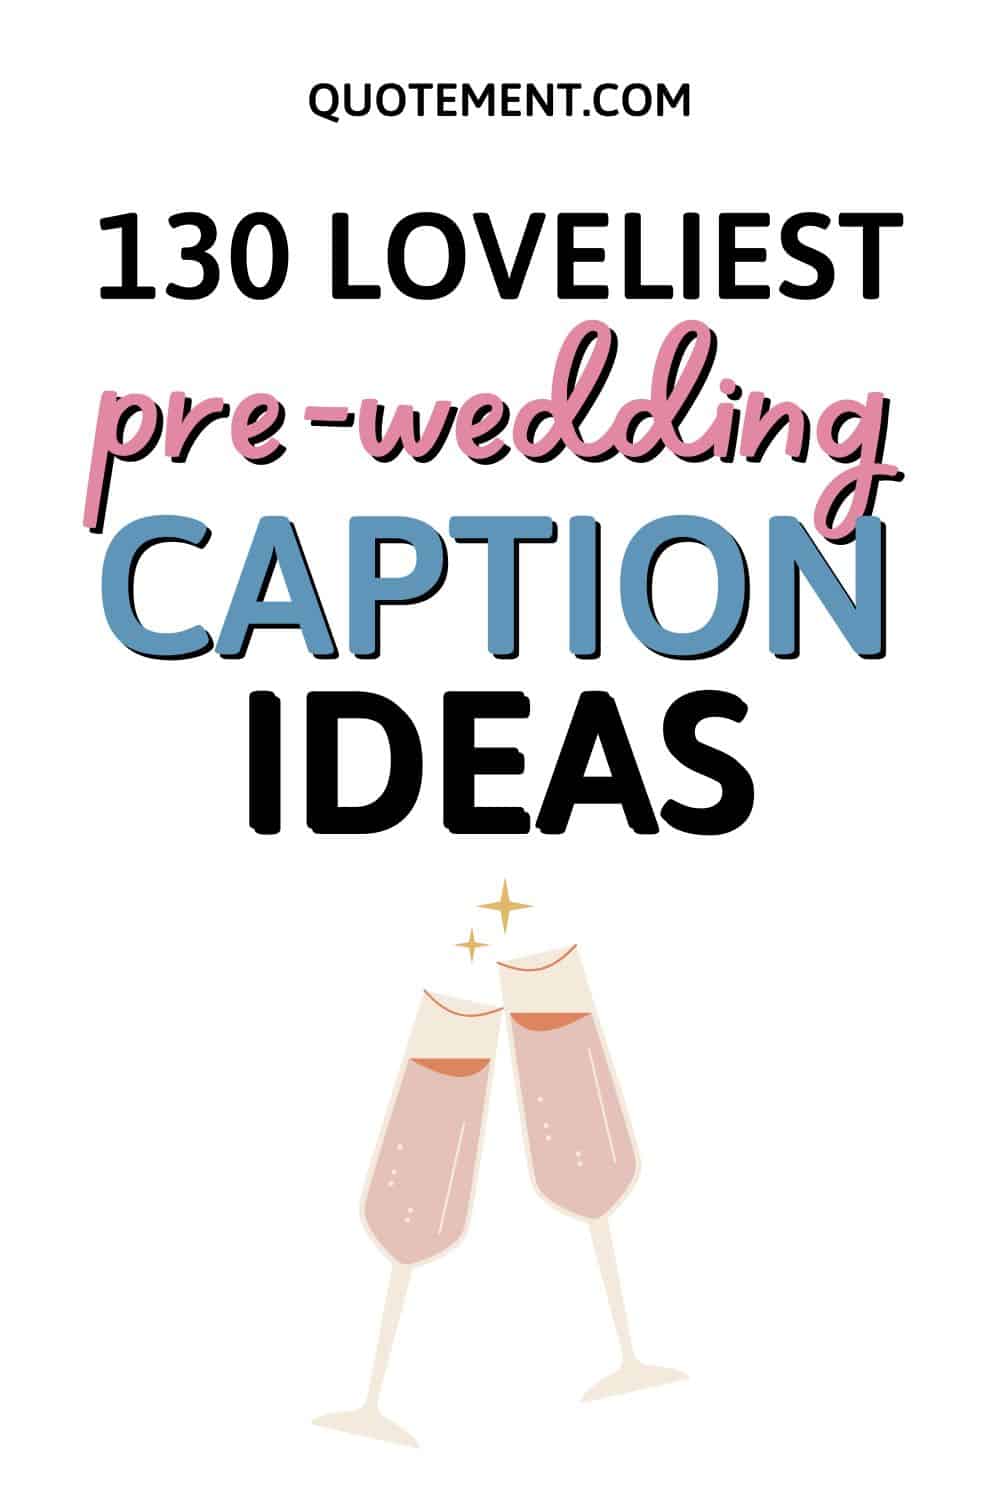 A Collection of the 130 Greatest Pre-Wedding Captions